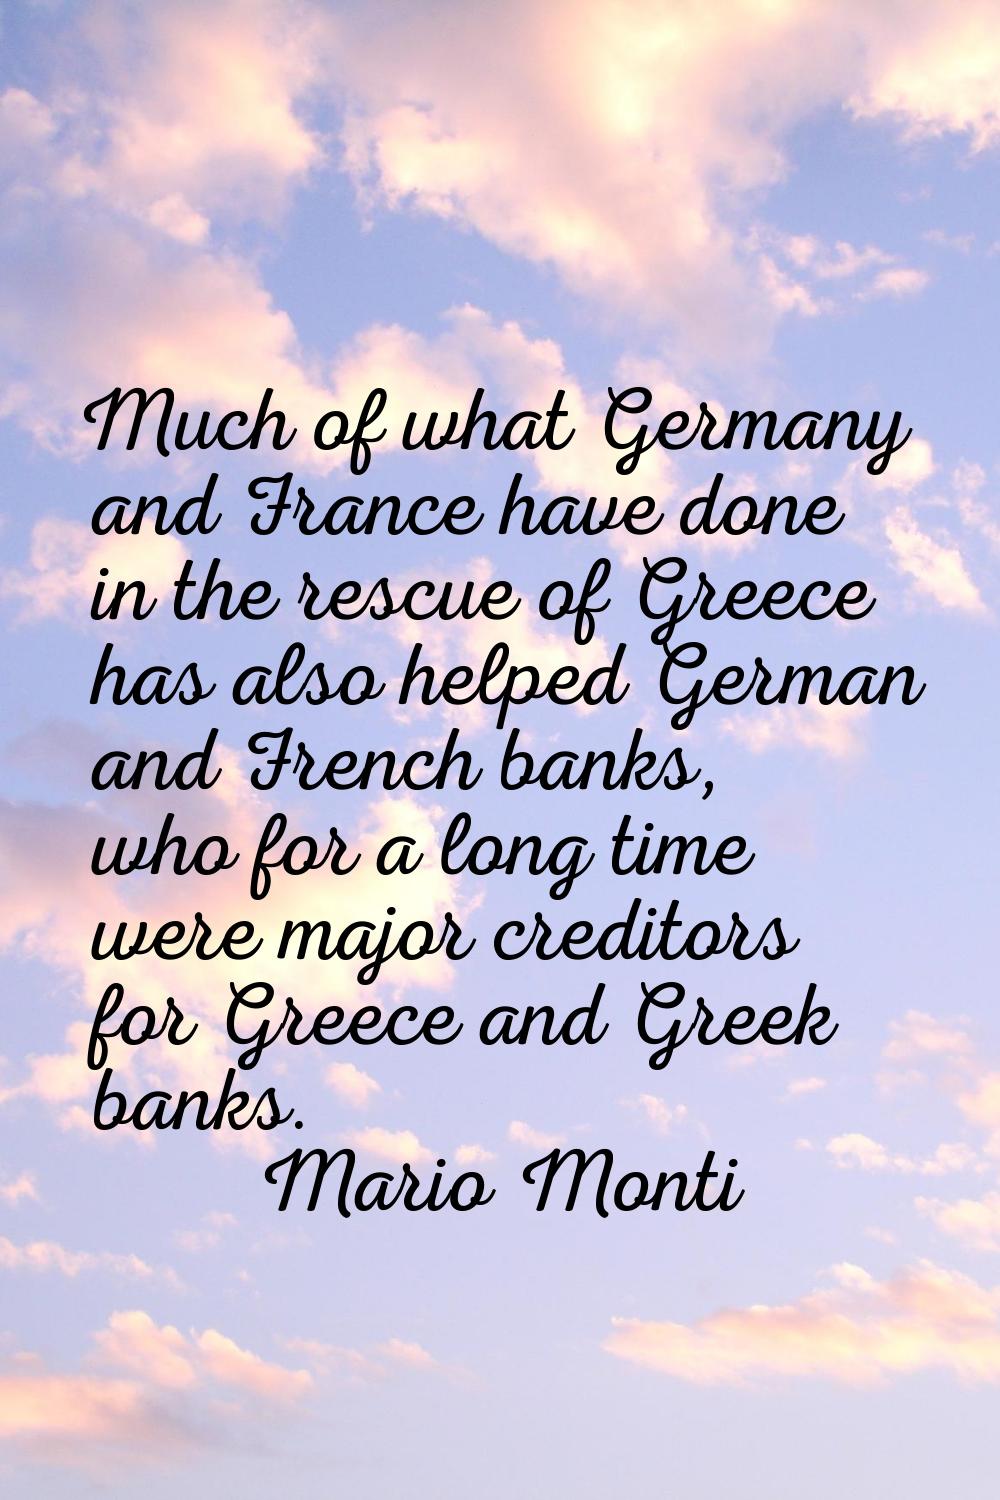 Much of what Germany and France have done in the rescue of Greece has also helped German and French